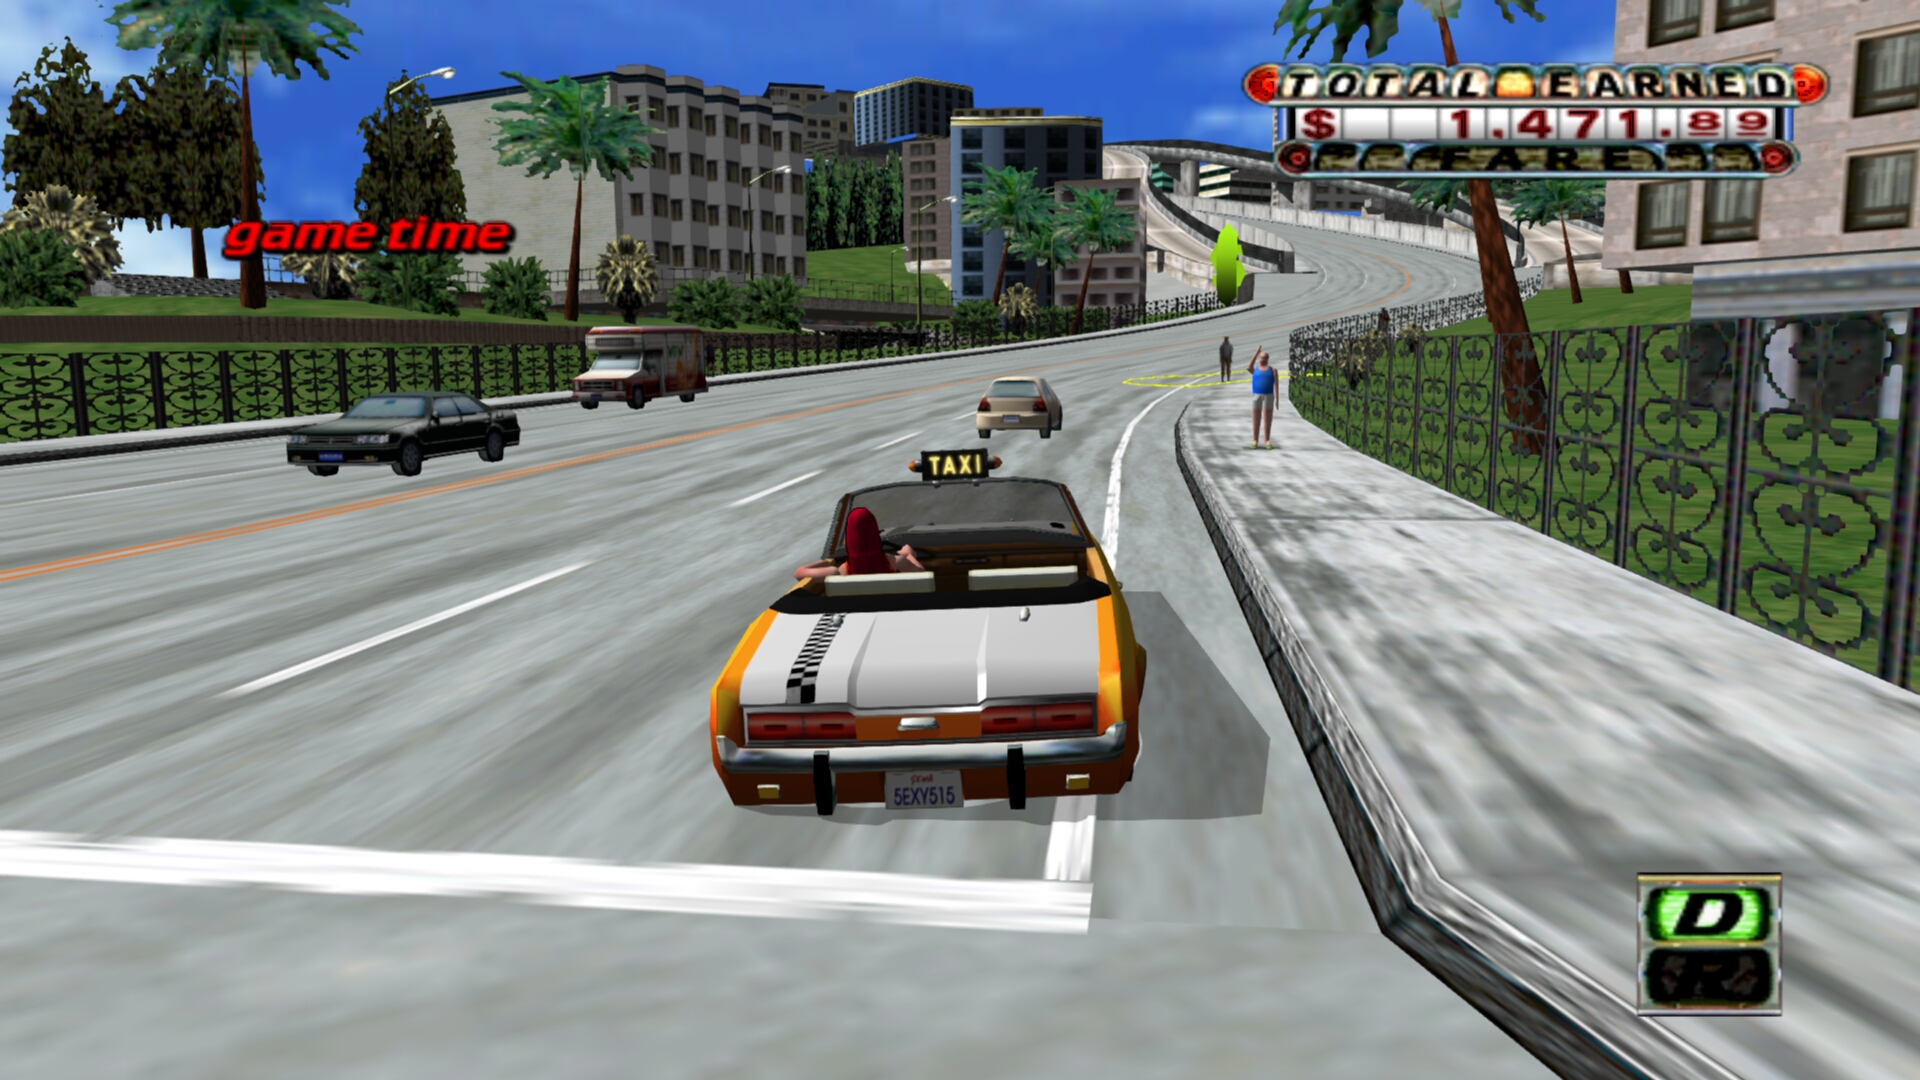 Play Crazy Taxi Classic on PC 